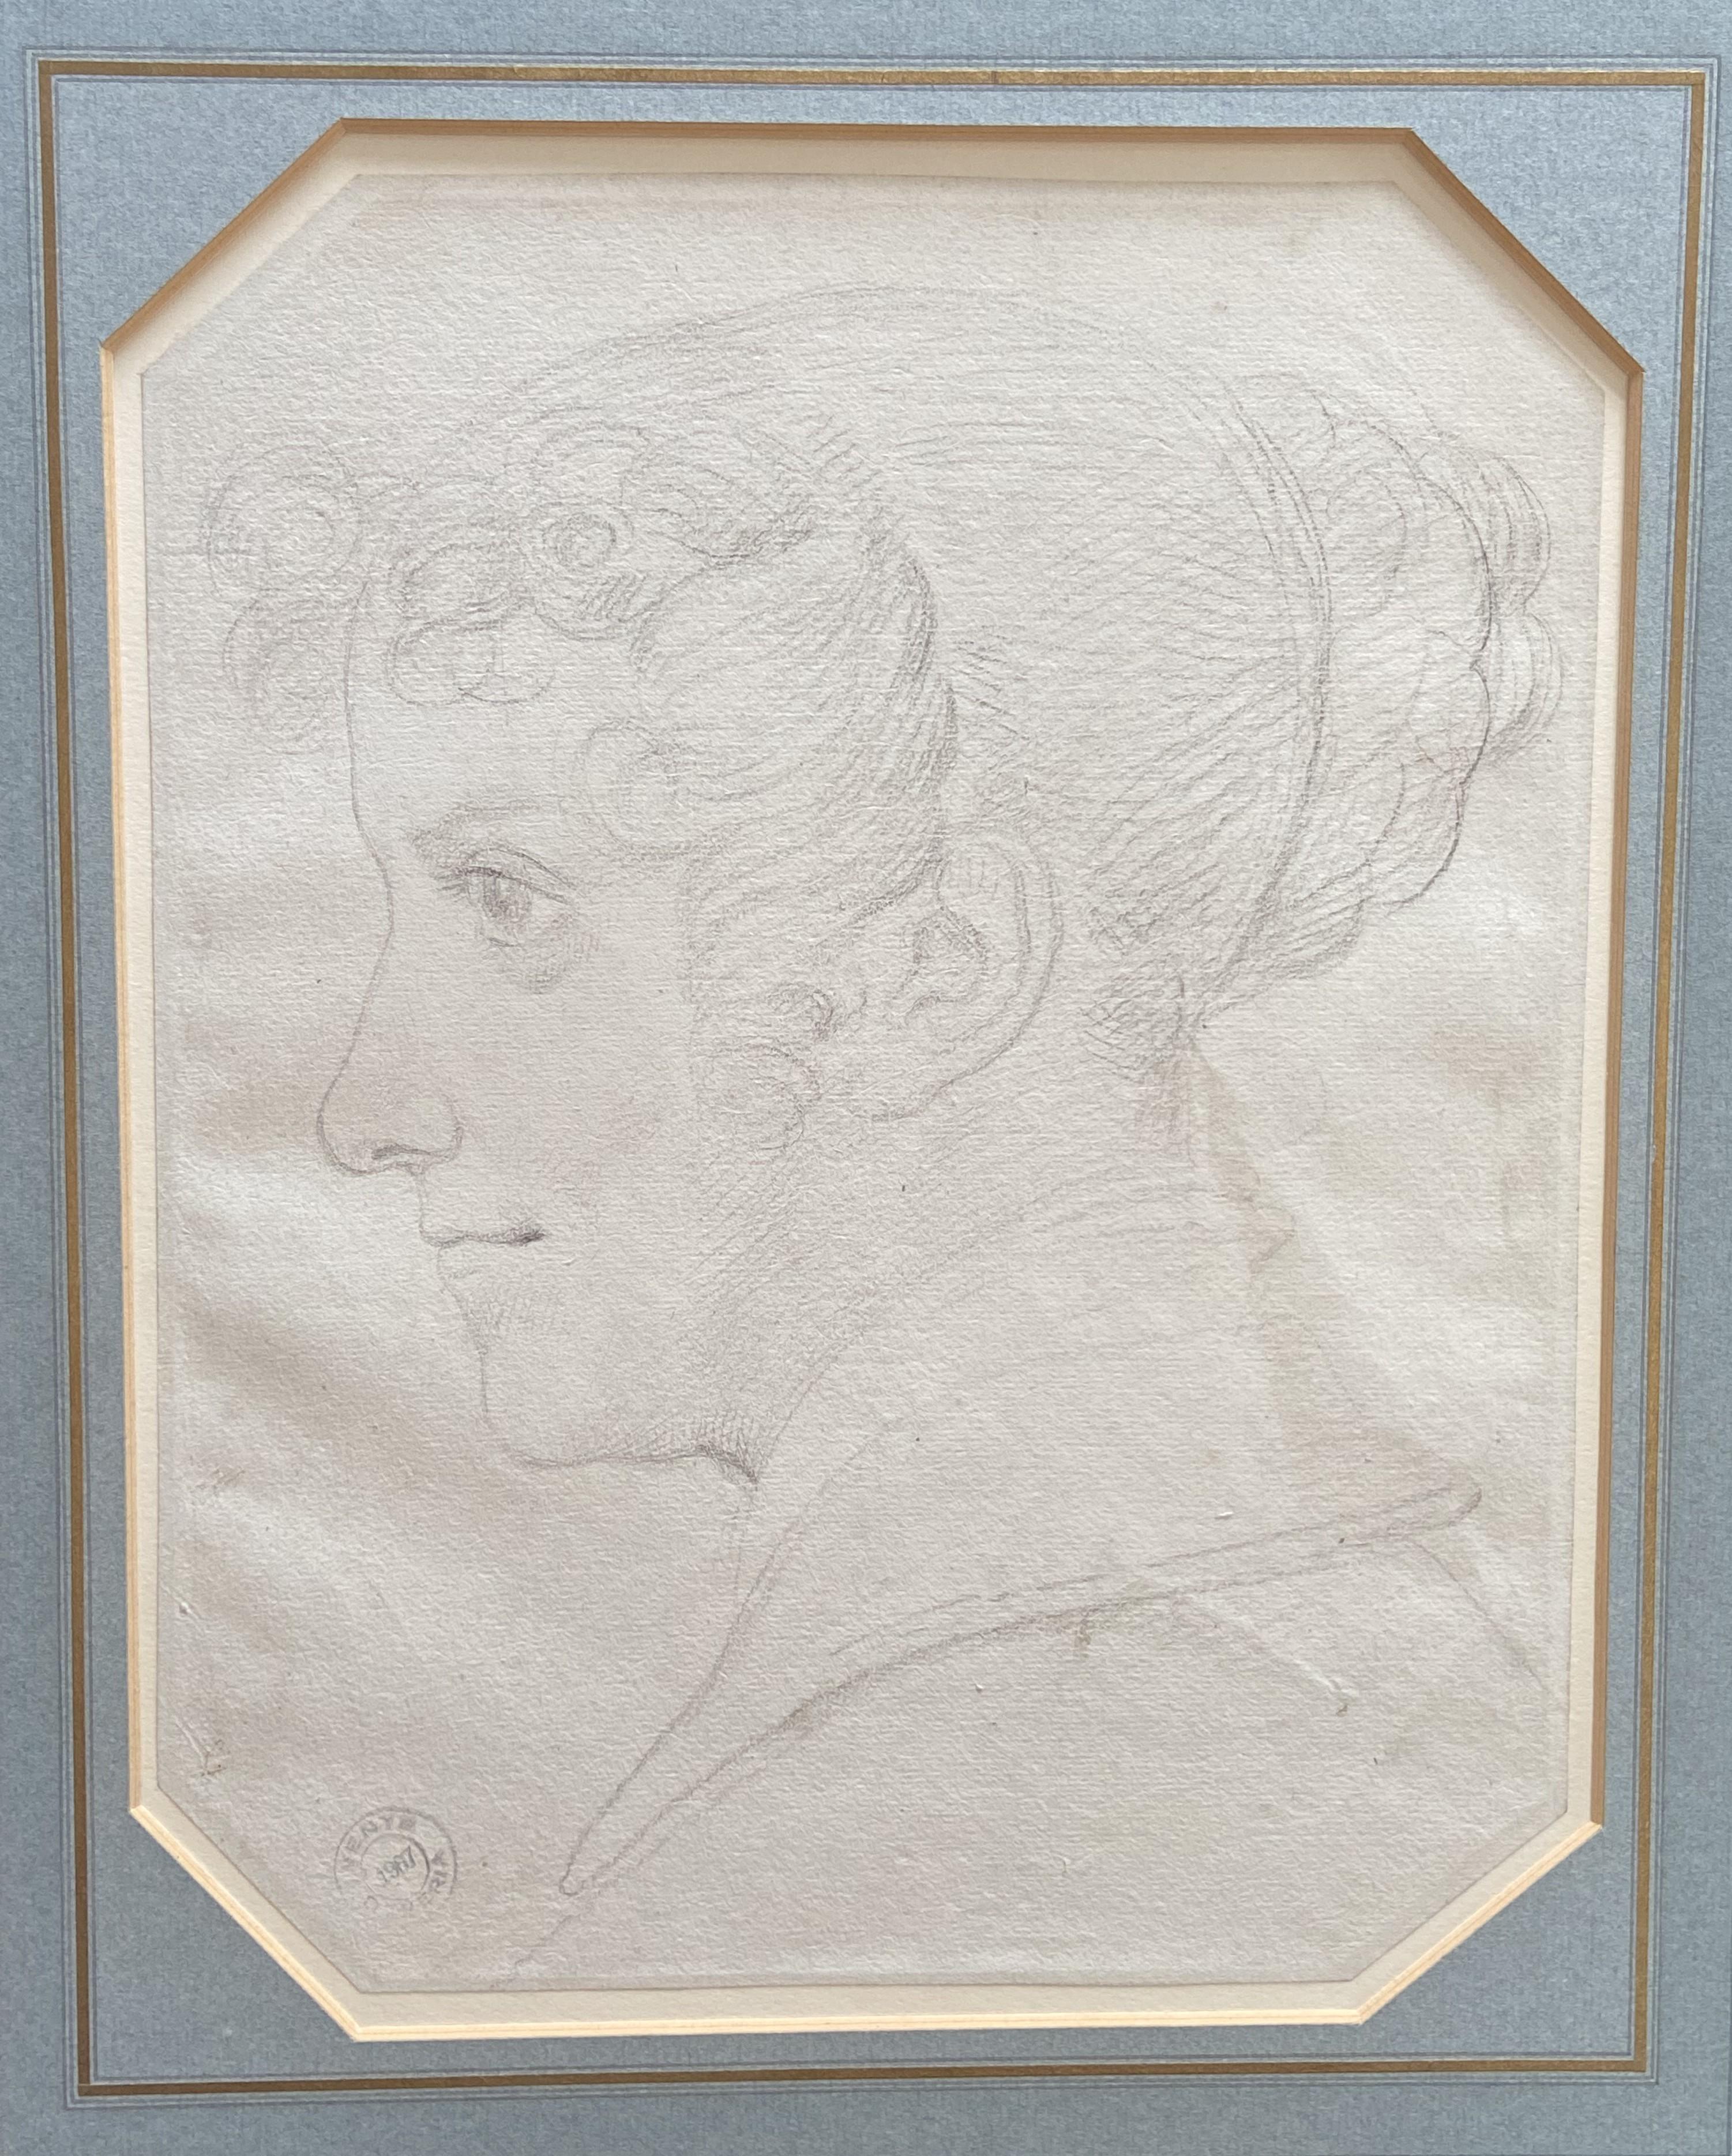 Achille Devéria (1800-1857) A young woman seen in profile, original drawing For Sale 1